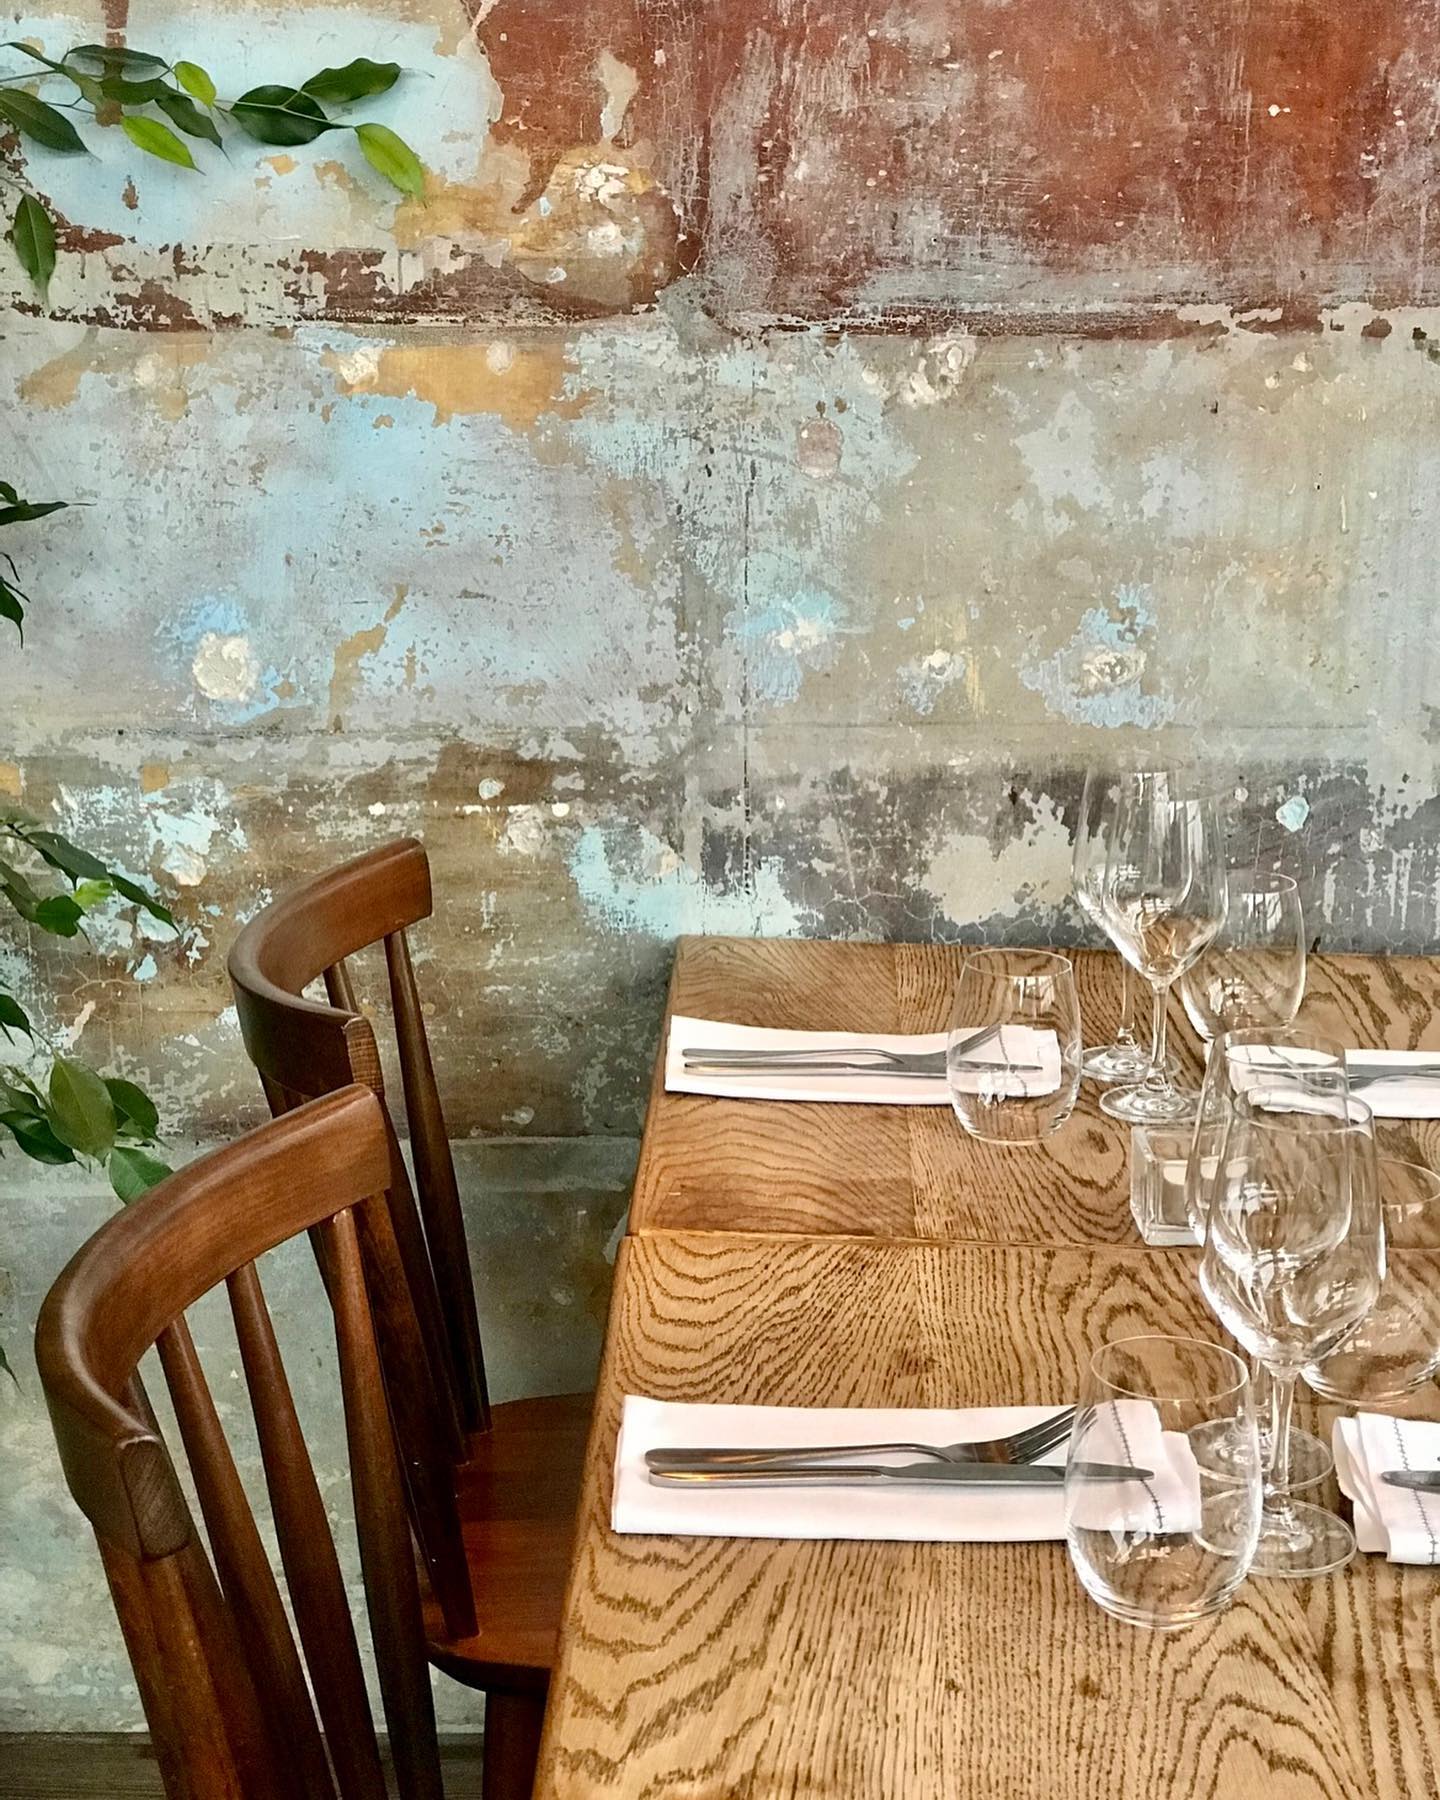 The best restaurants in Brixton, South London | A table made up for dinner at Maremma in Brixton